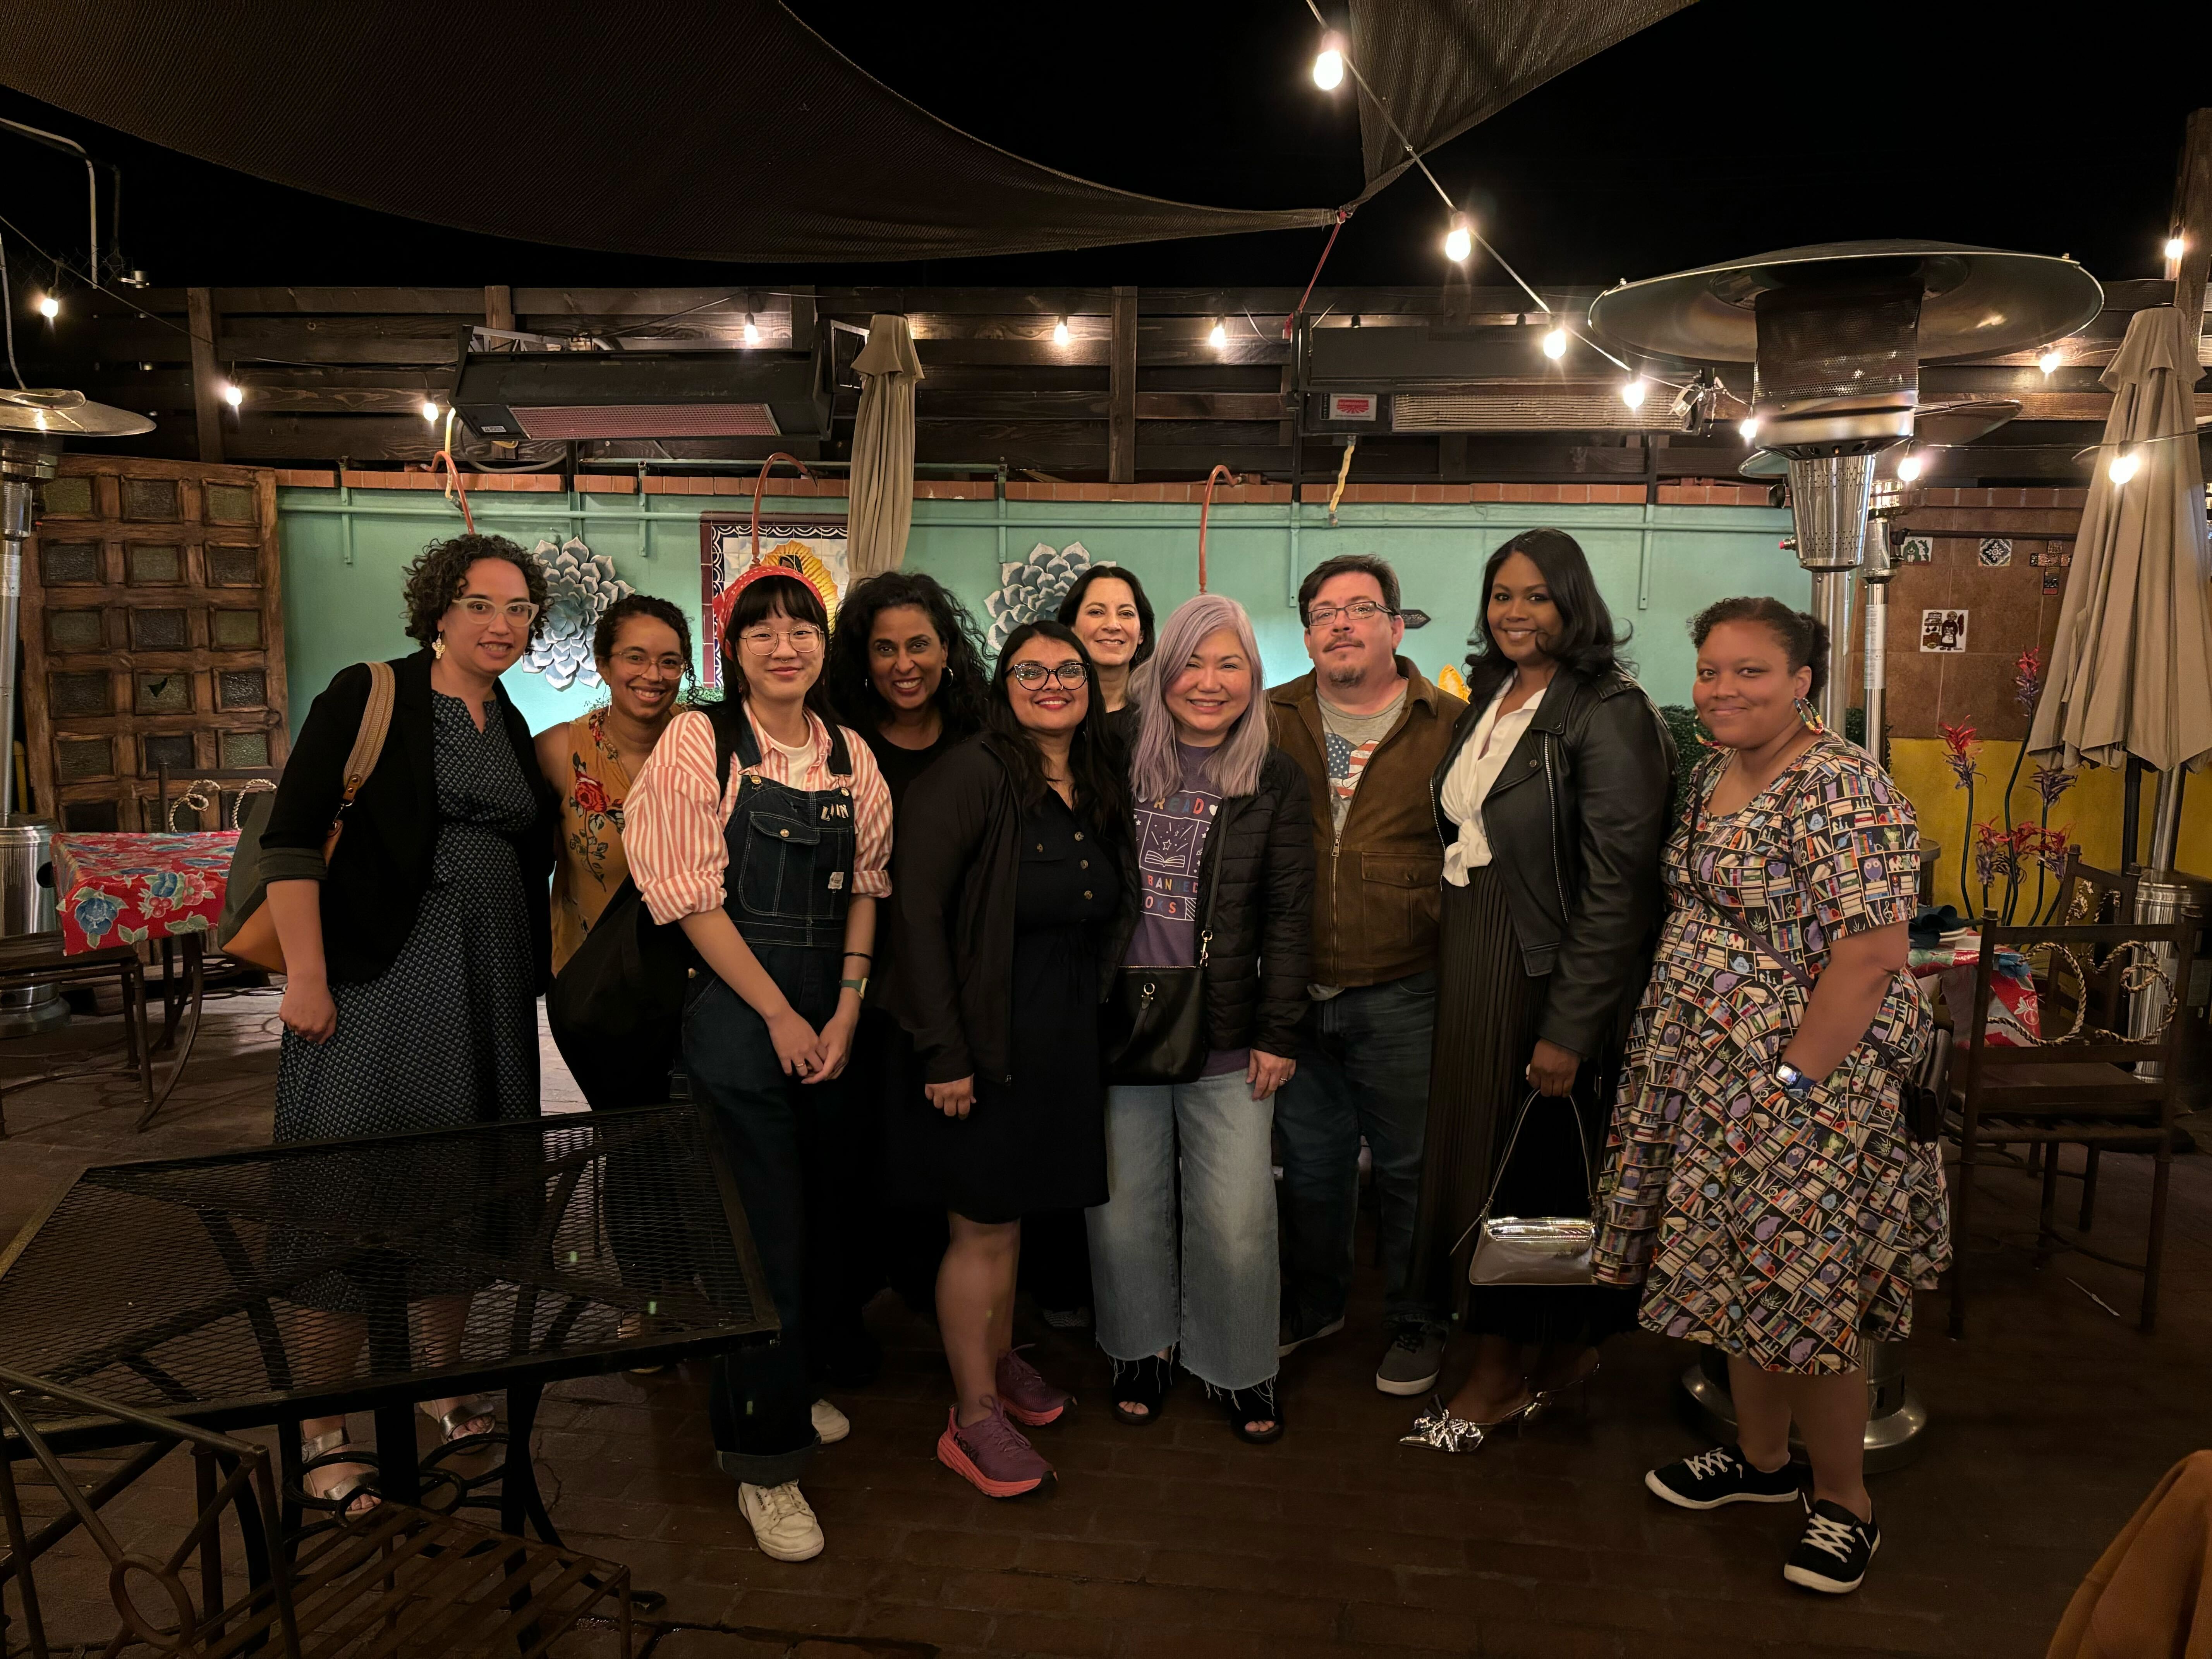 Senior Editor Hannah Gómez was at the Tucson Festival of Books last weekend, moderating a panel with romance authors, meeting KAA freelancers in person for the first time, and hosting dinner with luminaries including Ellen Oh and Vashti Harrison.